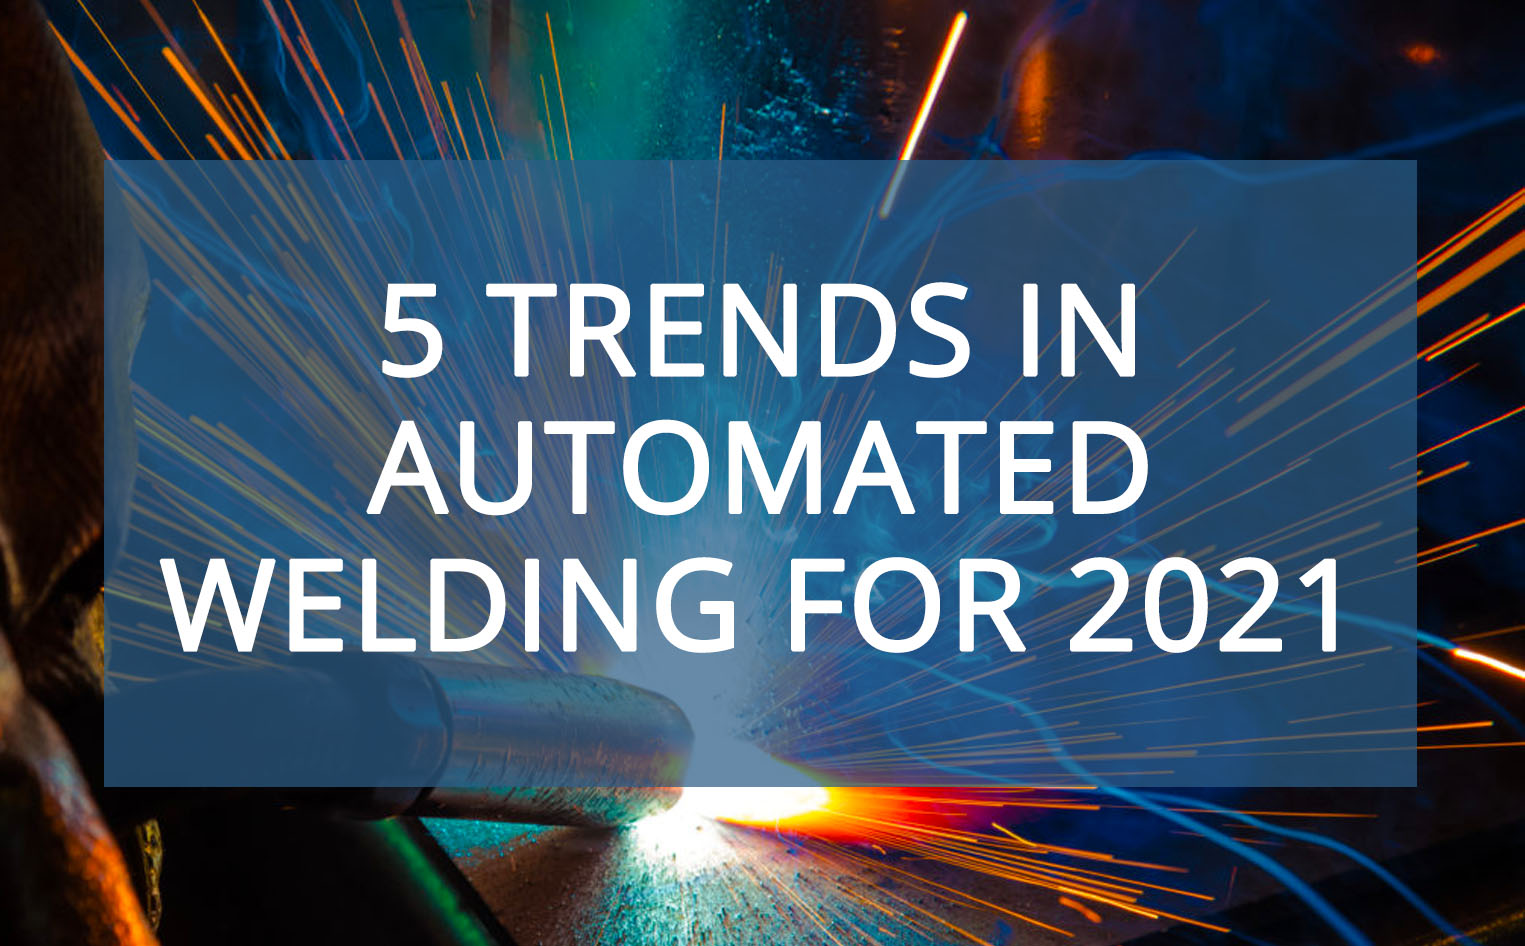 5 Trends in Automated Welding for 2021